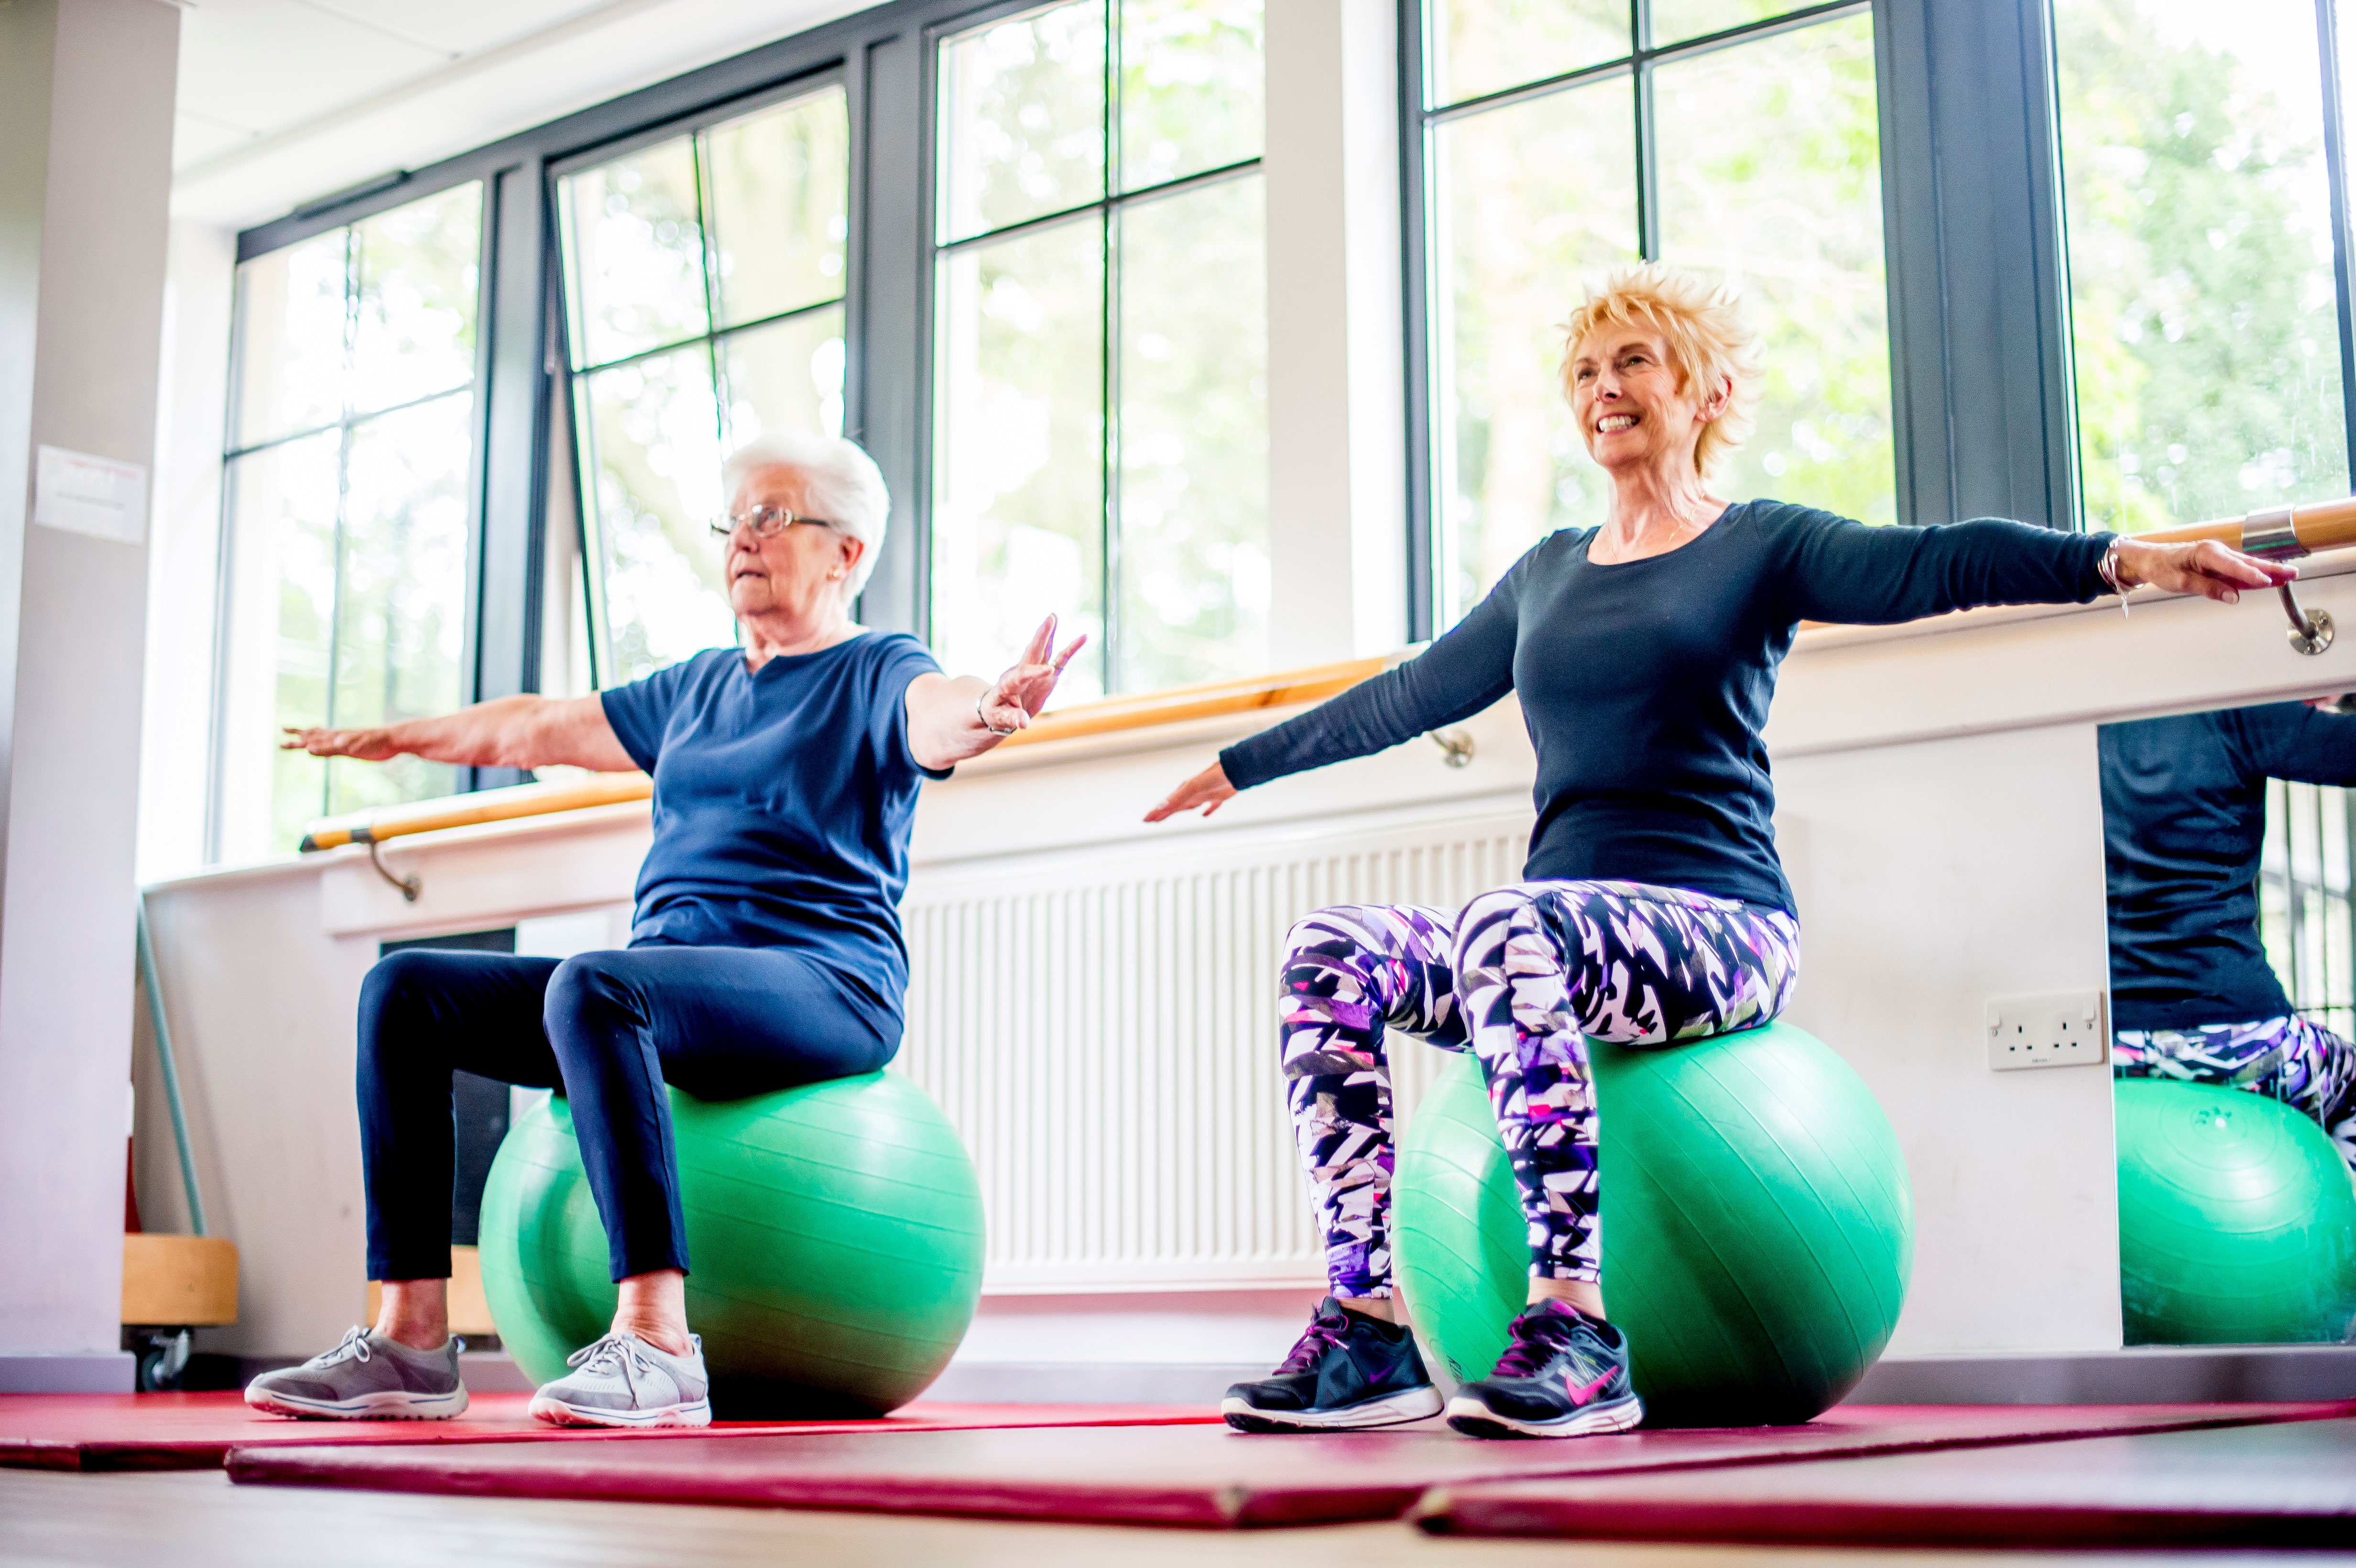 everyday exercise class with two patients using exercise balls